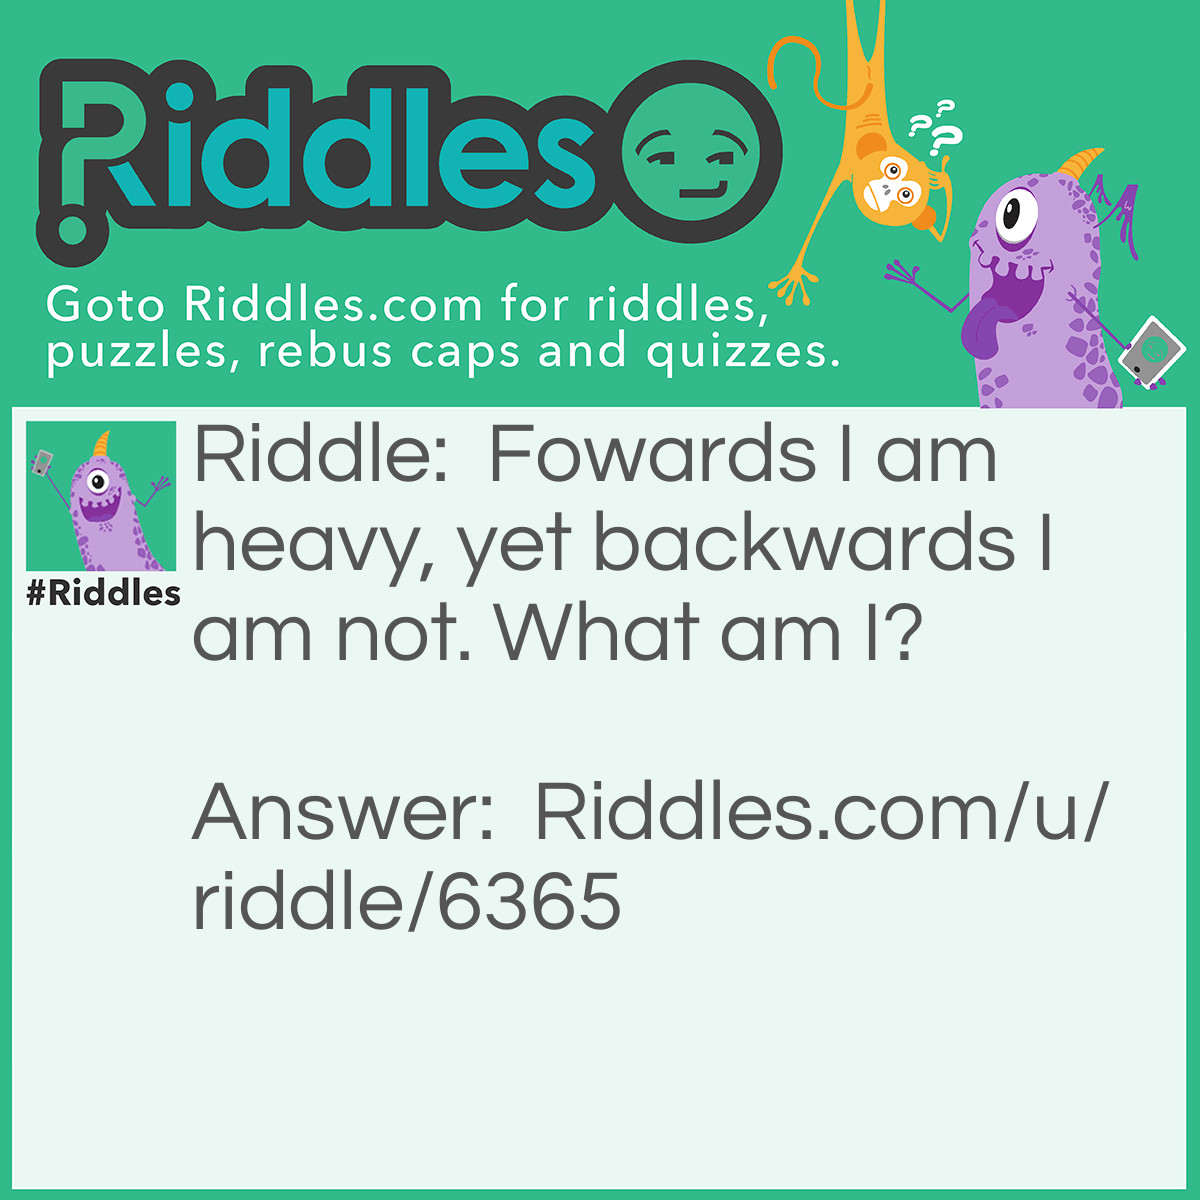 Riddle: Forwards I am heavy, yet backwards I am not. What am I? Answer: A ‘ton.’ Because a ton is heavy and a ton spelled backwards is ‘not.’